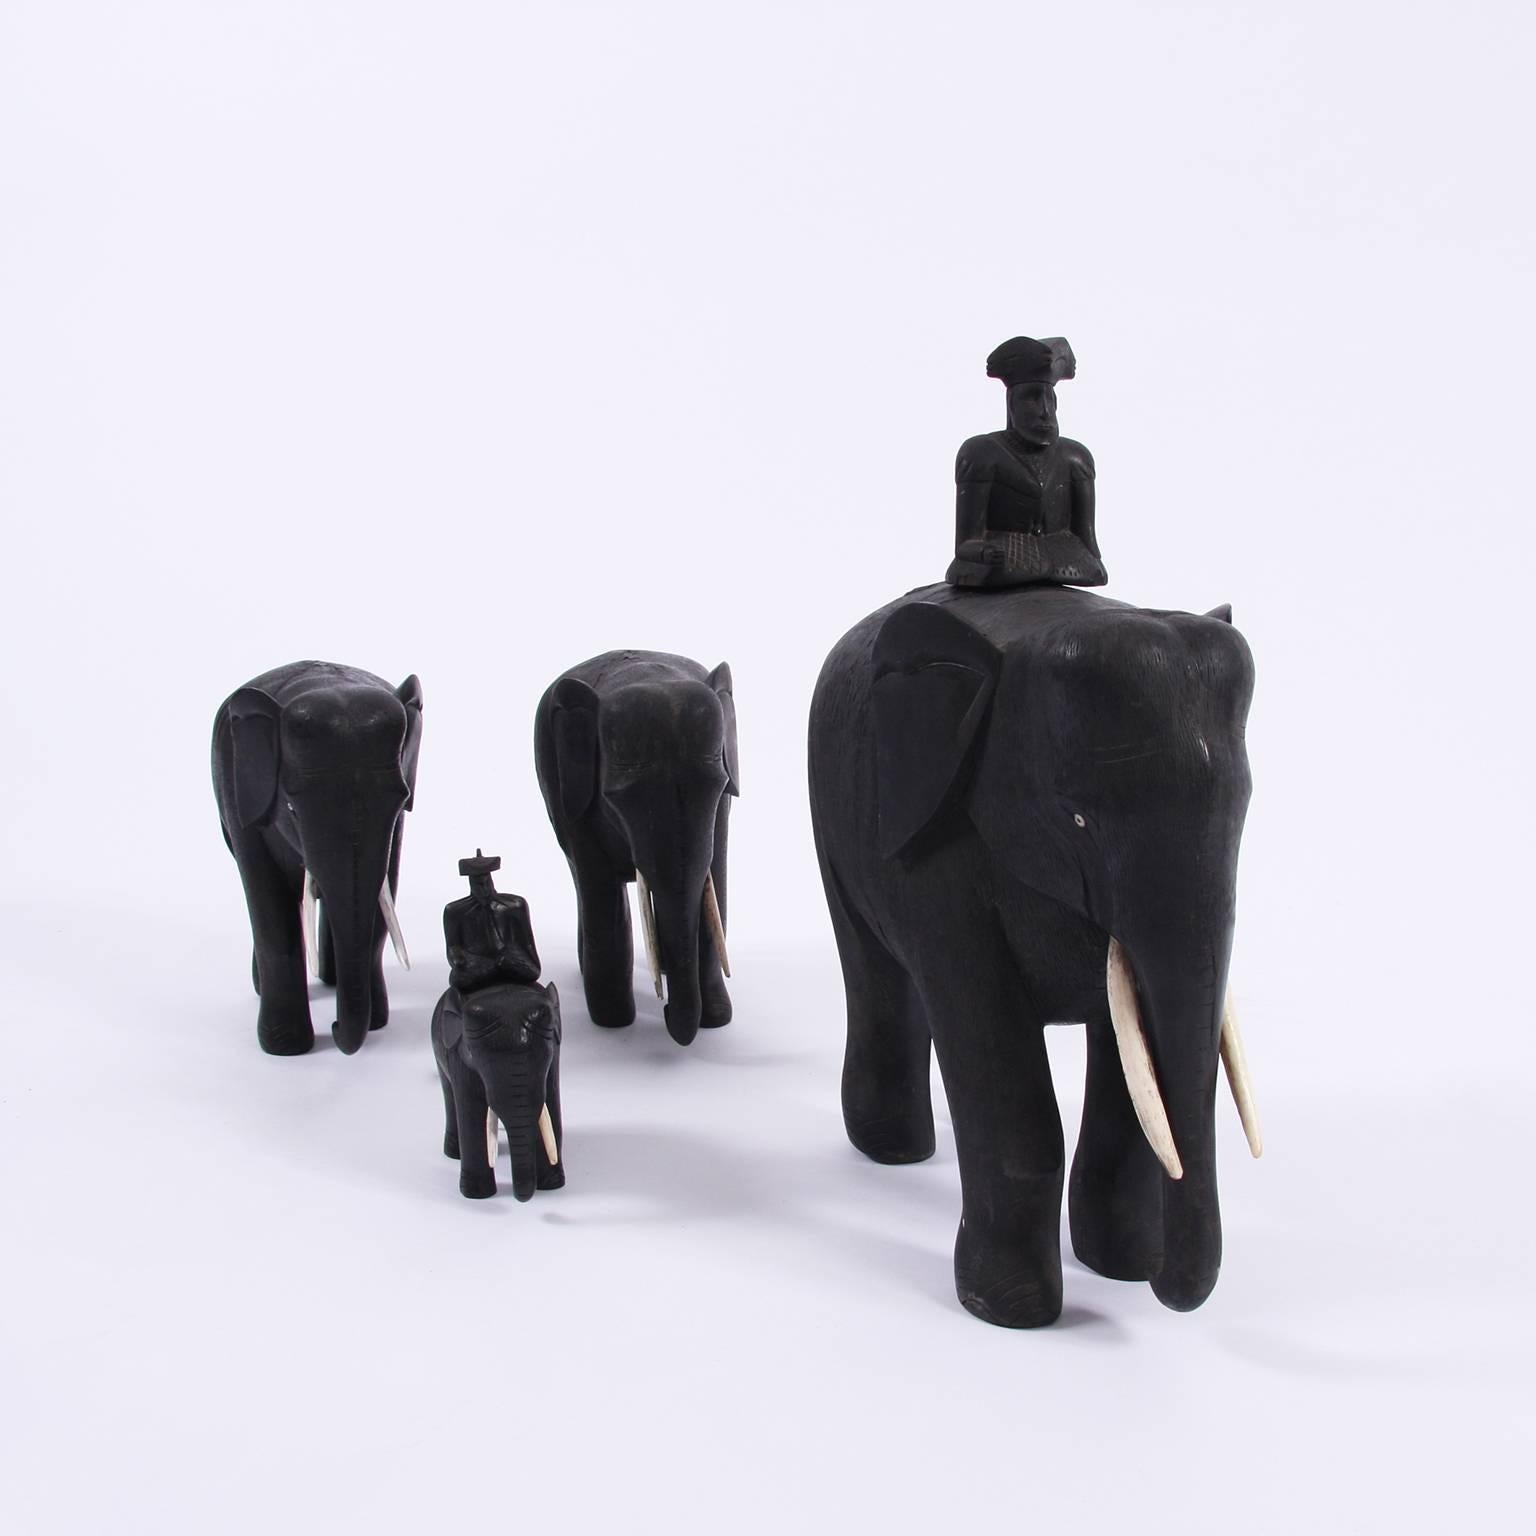 Ceylonese, 20th century

A collection of ebony elephants in various sizes, two with riders. 

(Dimensions are for the largest elephant in the collection).